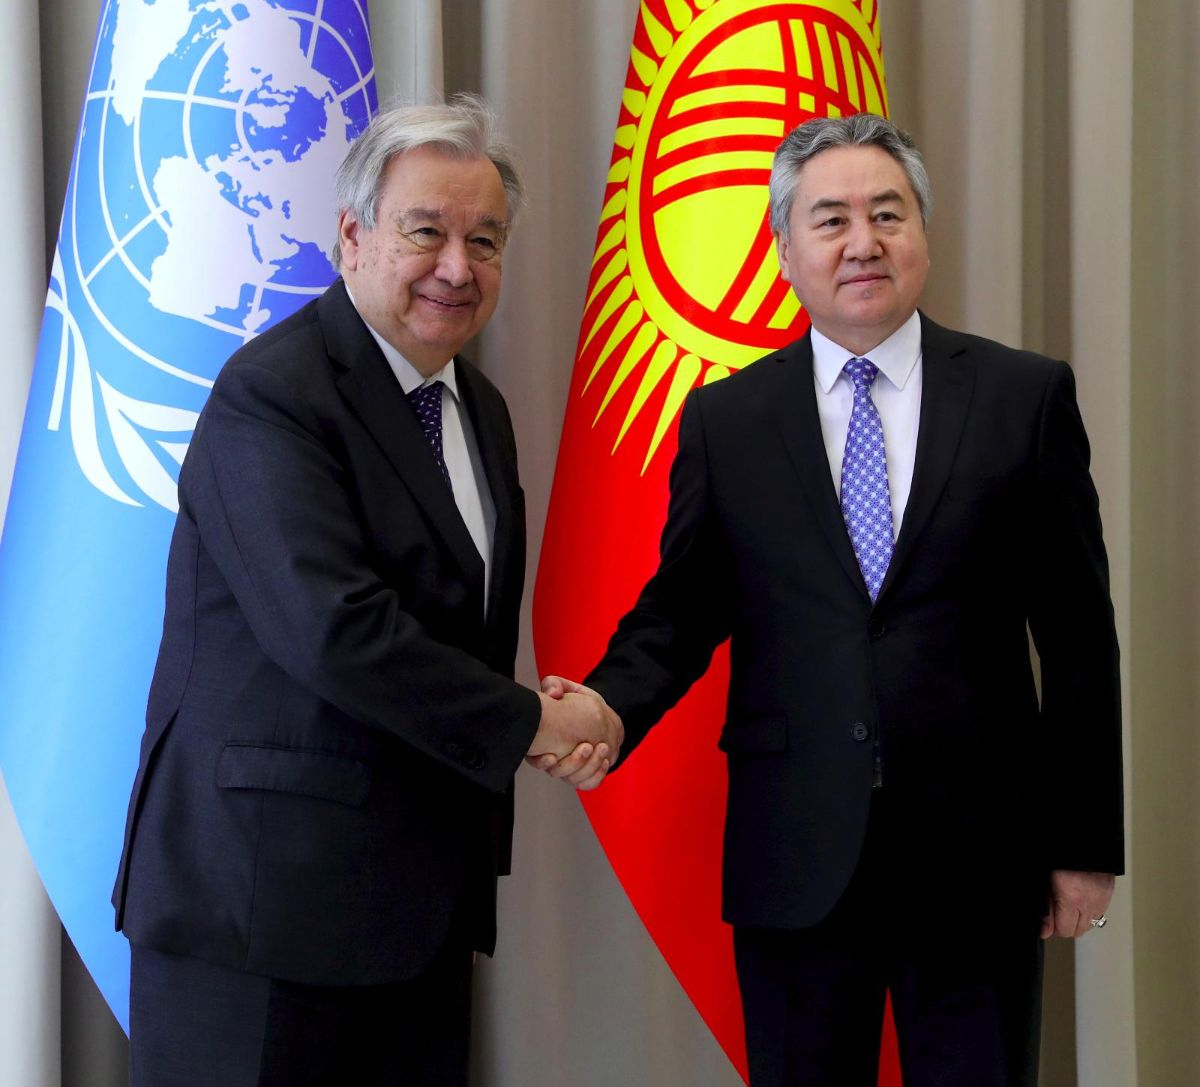 Guterres commends strong collaboration between UN and Kyrgyzstan